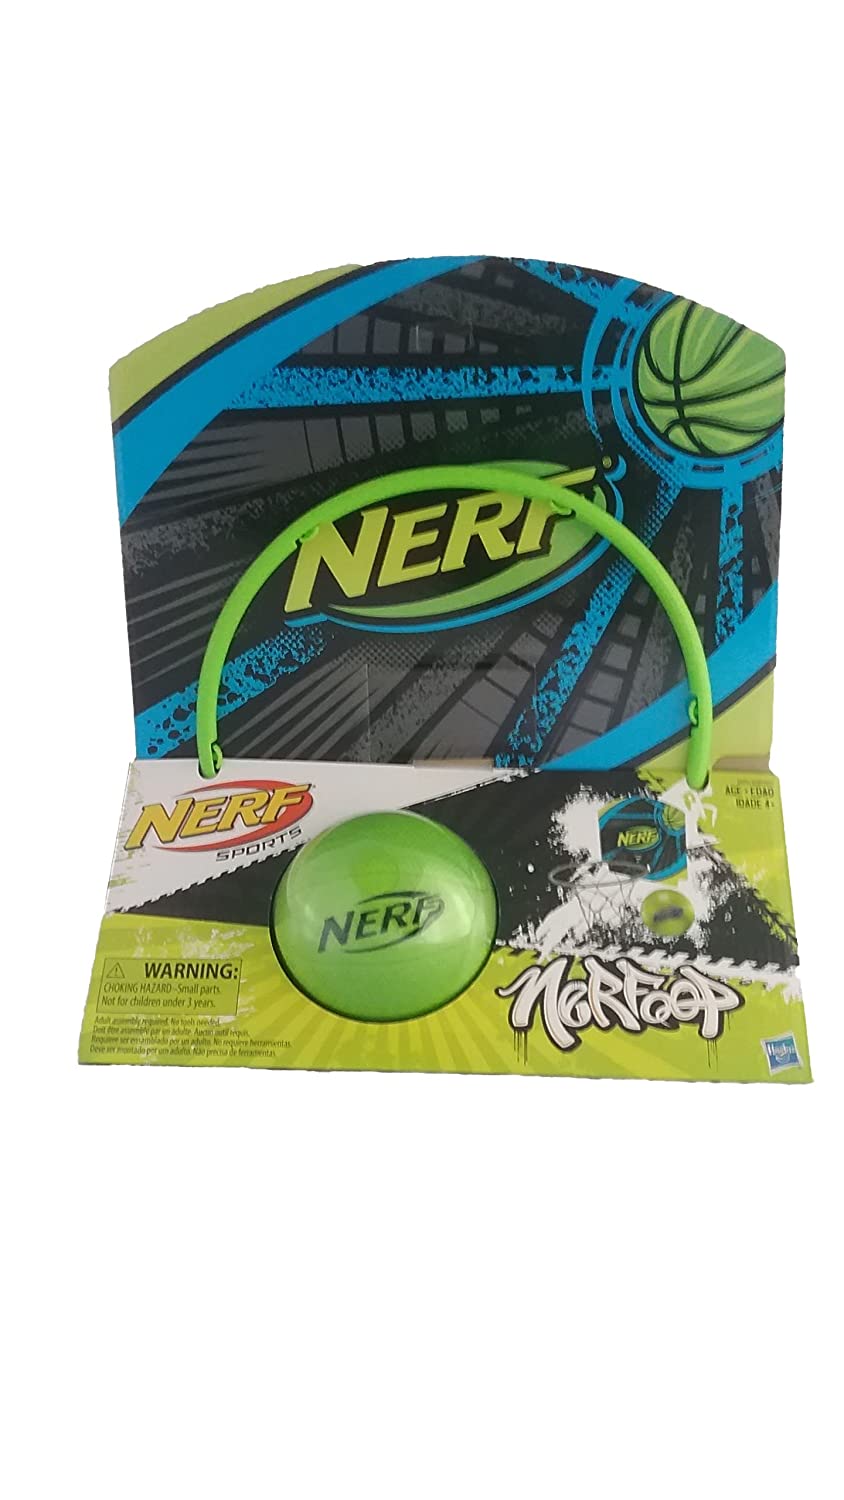 image of a basketball hoop in yellow green color